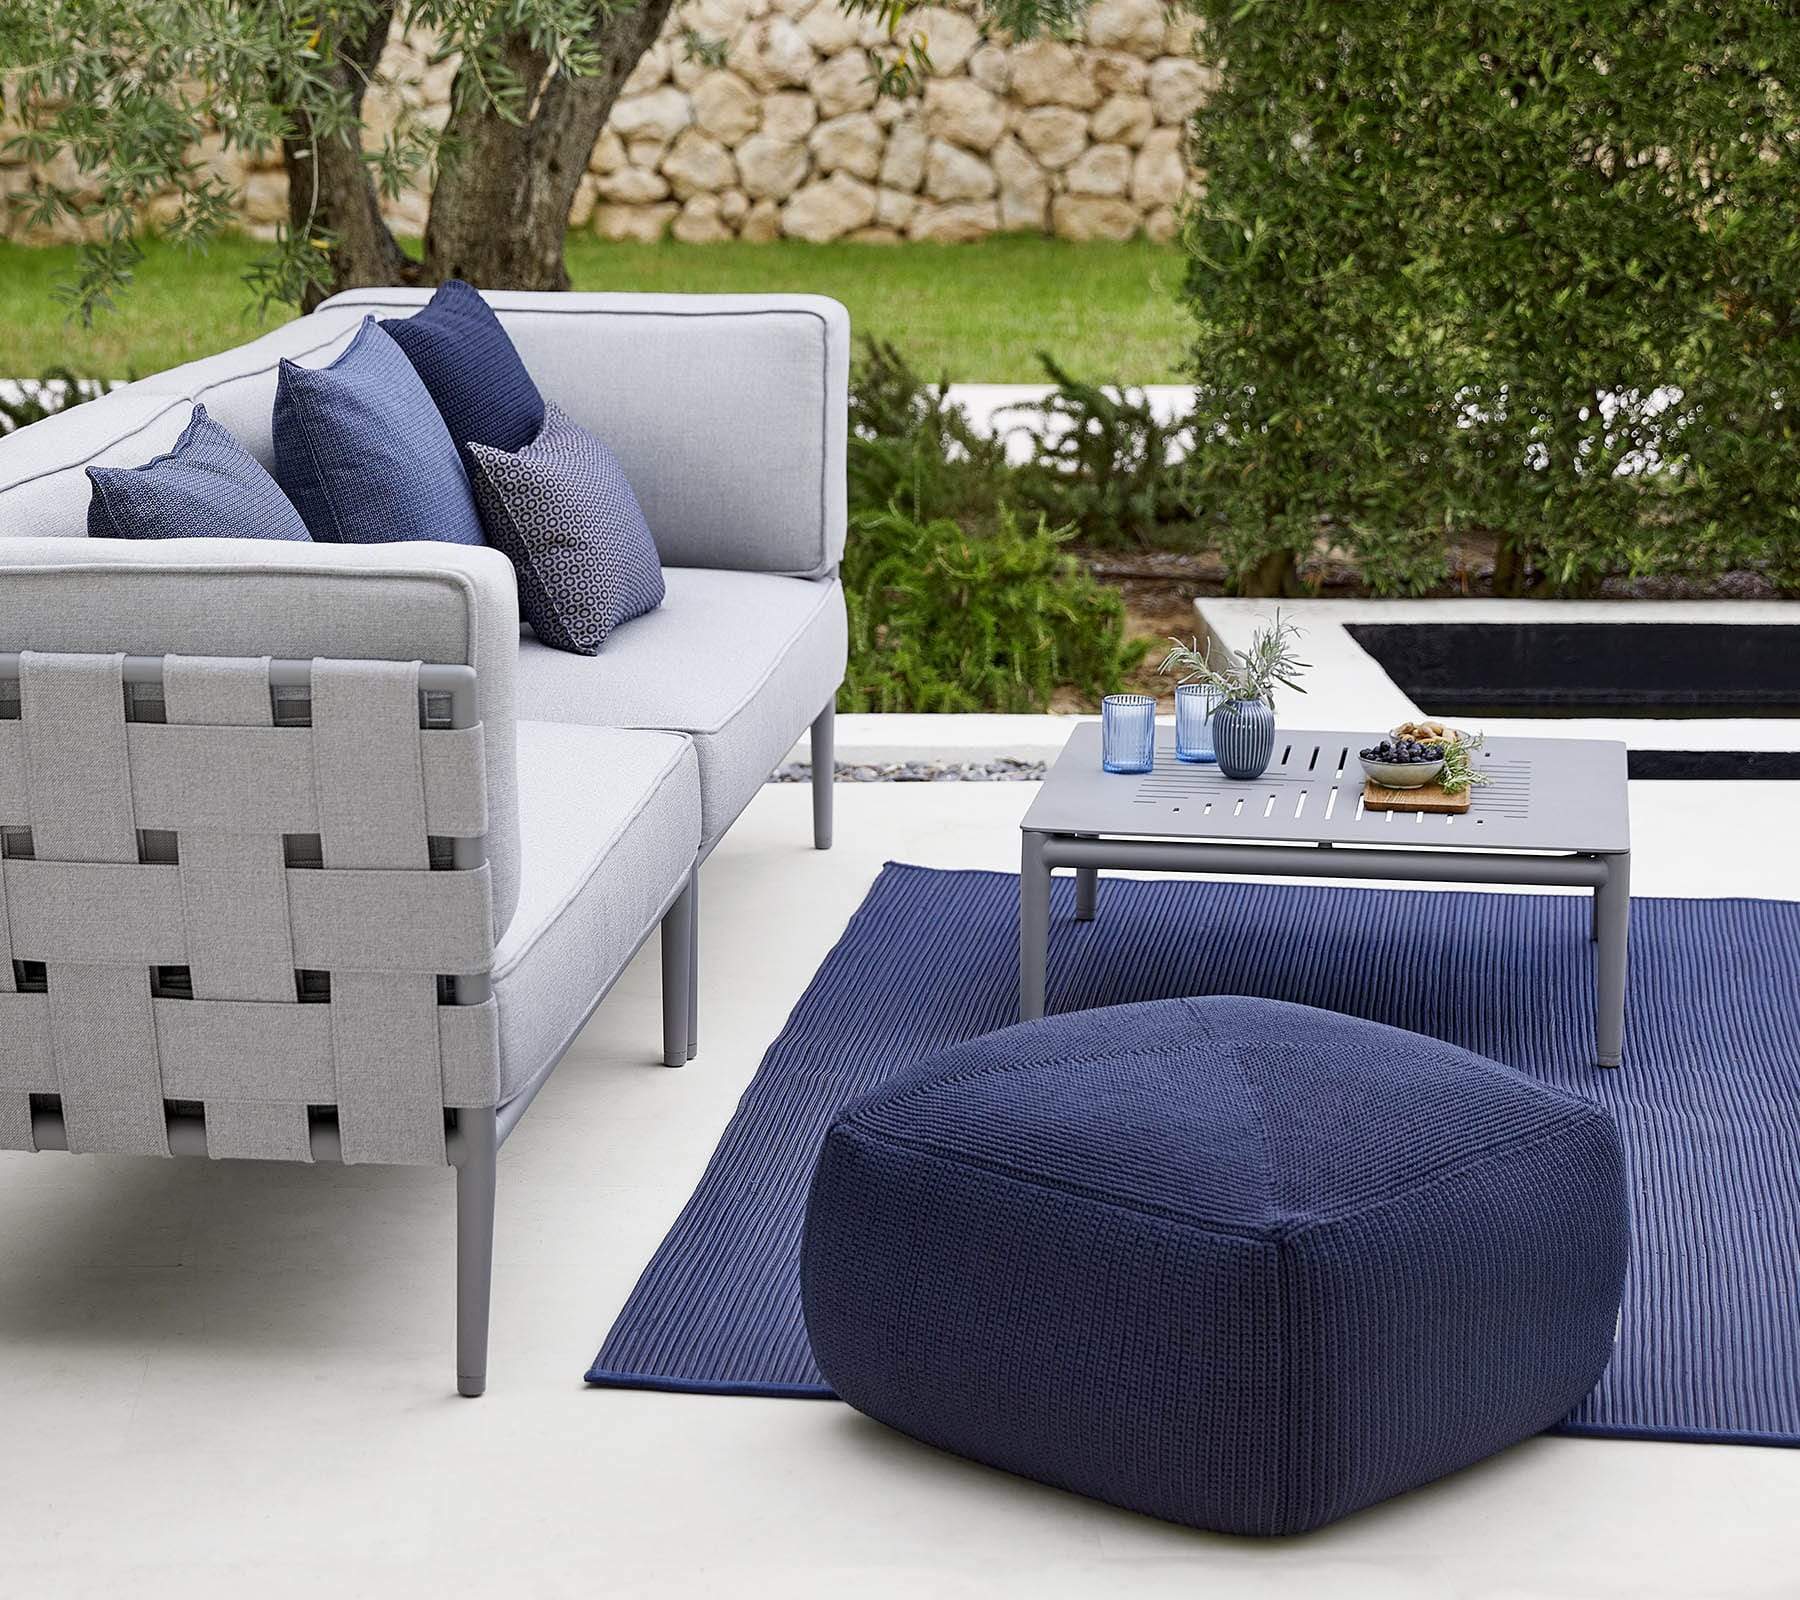 Boxhill's Divine Fabric Outdoor Footstool with 3-seater sofa and a small gray square table